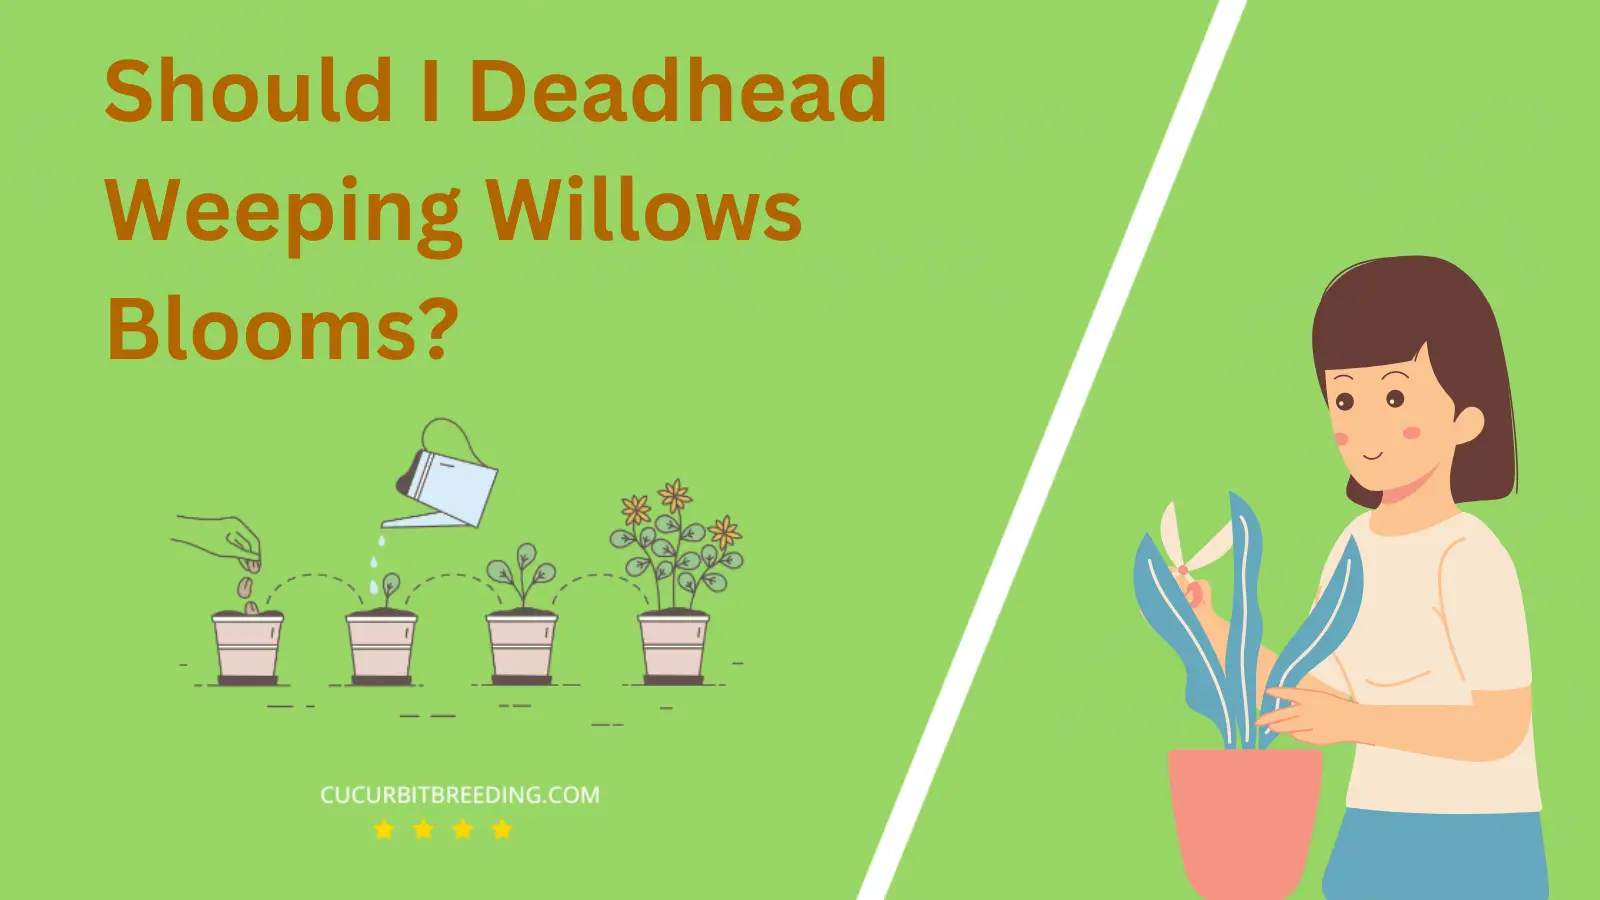 Should I Deadhead Weeping Willows Blooms?